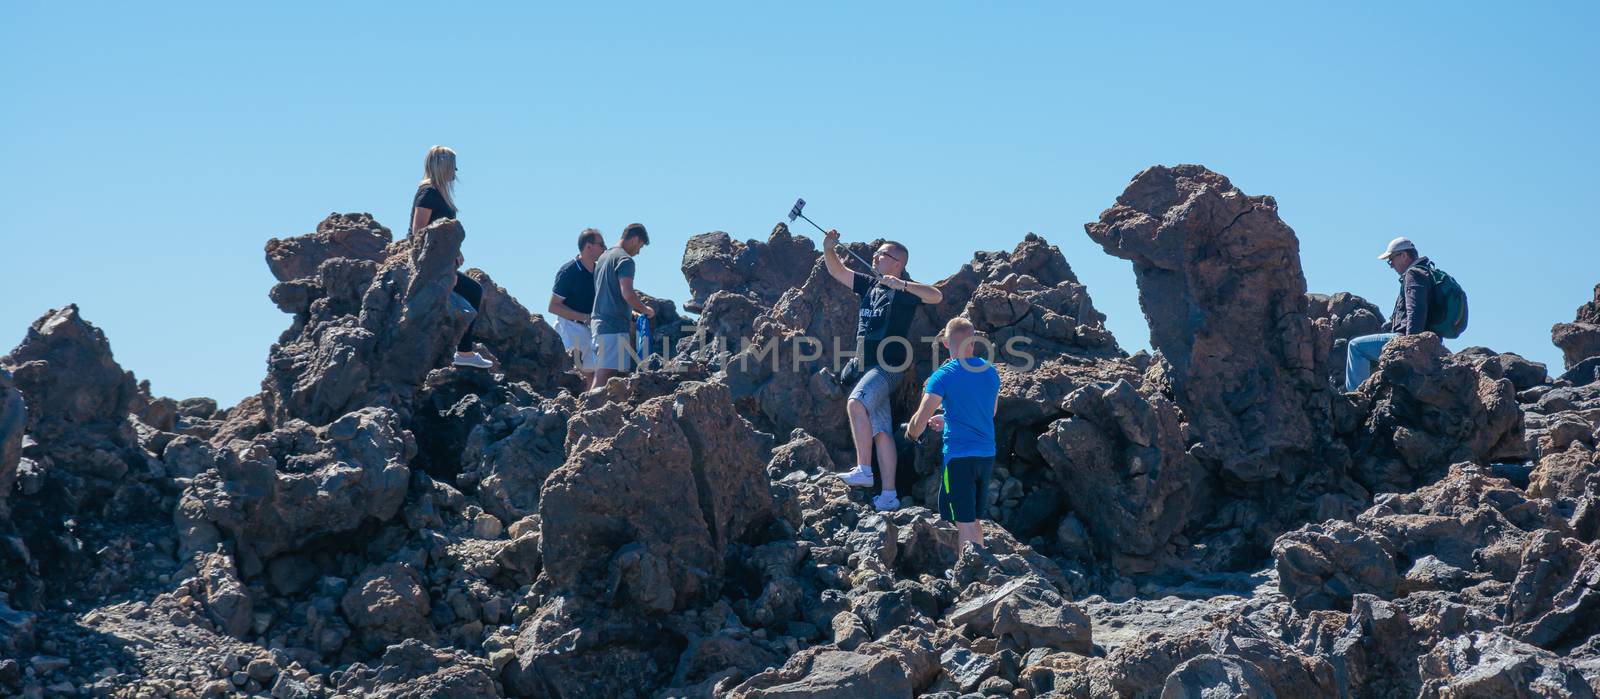 Spain, Tenerife - 09/15/2016: Tourists photo session on the volc by Grommik